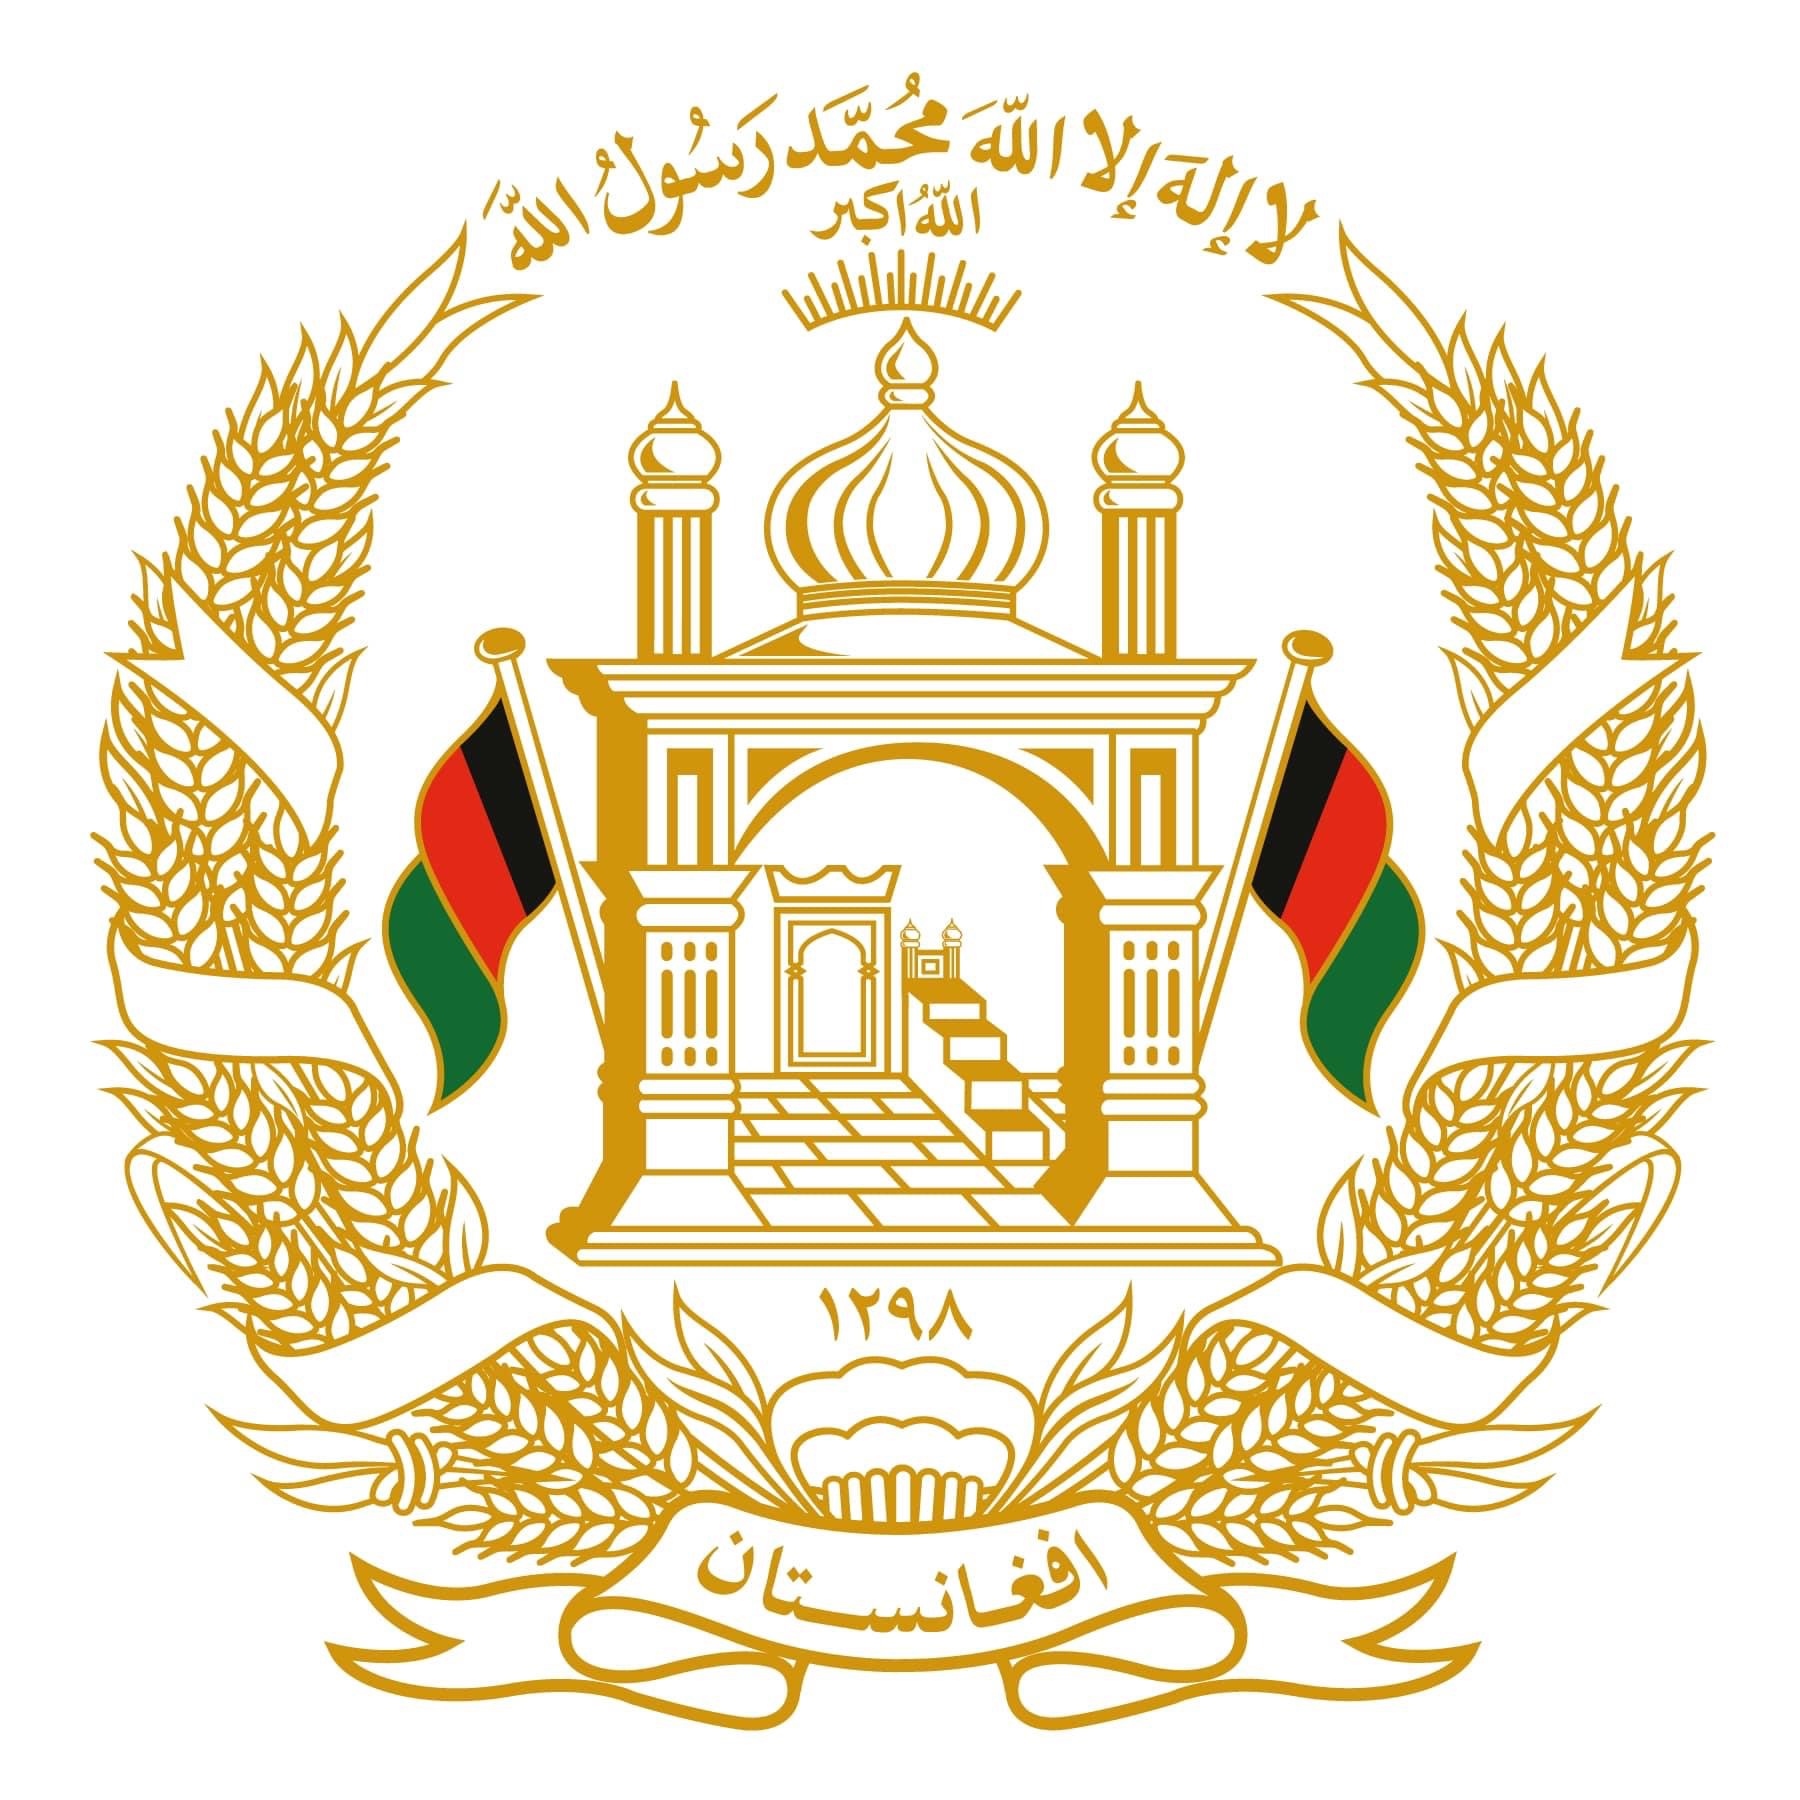 Statement of the Embassy of the Islamic Republic of Afghanistan on the 20th Anniversary of 9/11